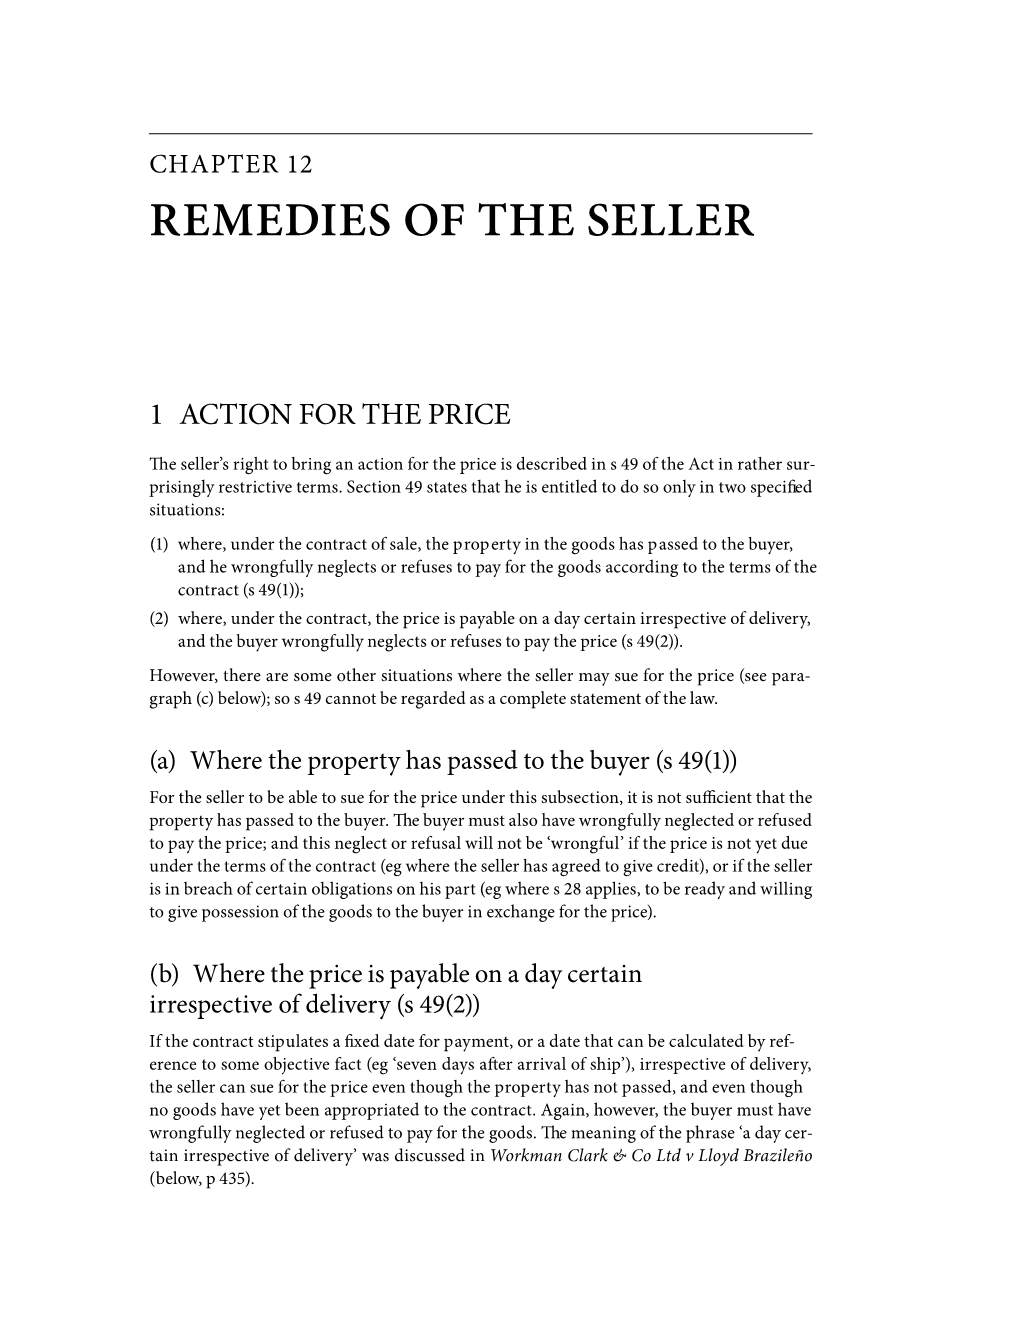 Remedies of the Seller